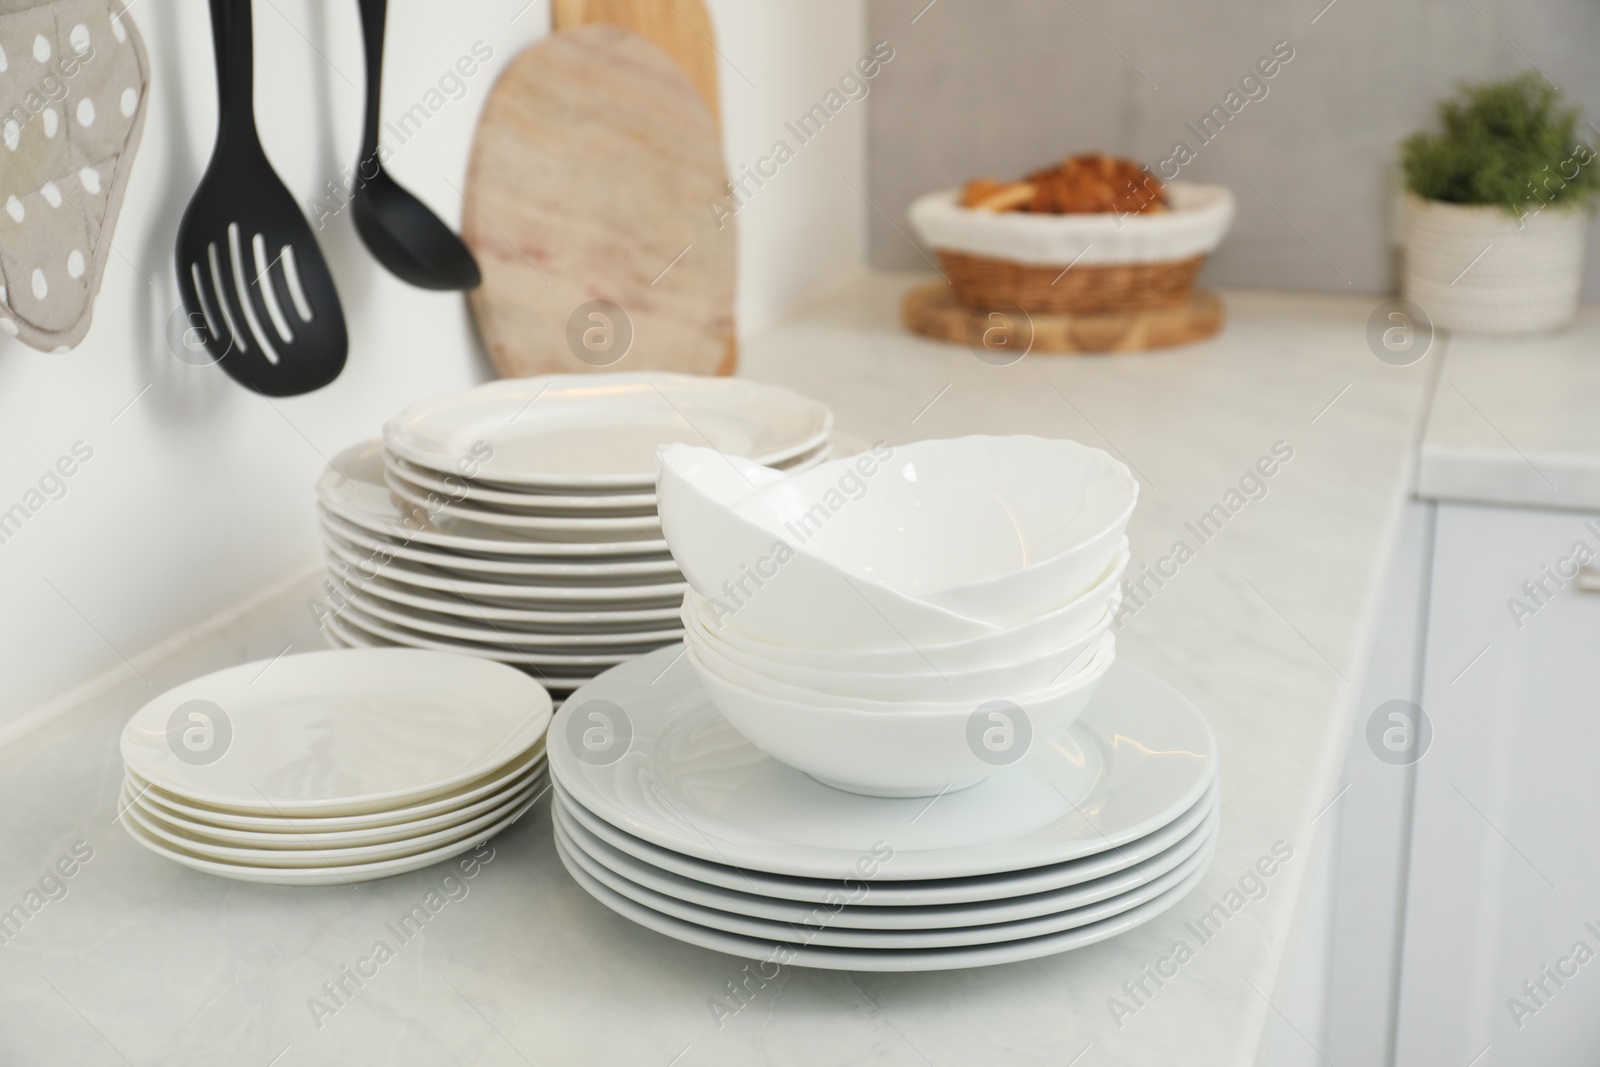 Photo of Clean plates and bowls on white marble countertop in kitchen